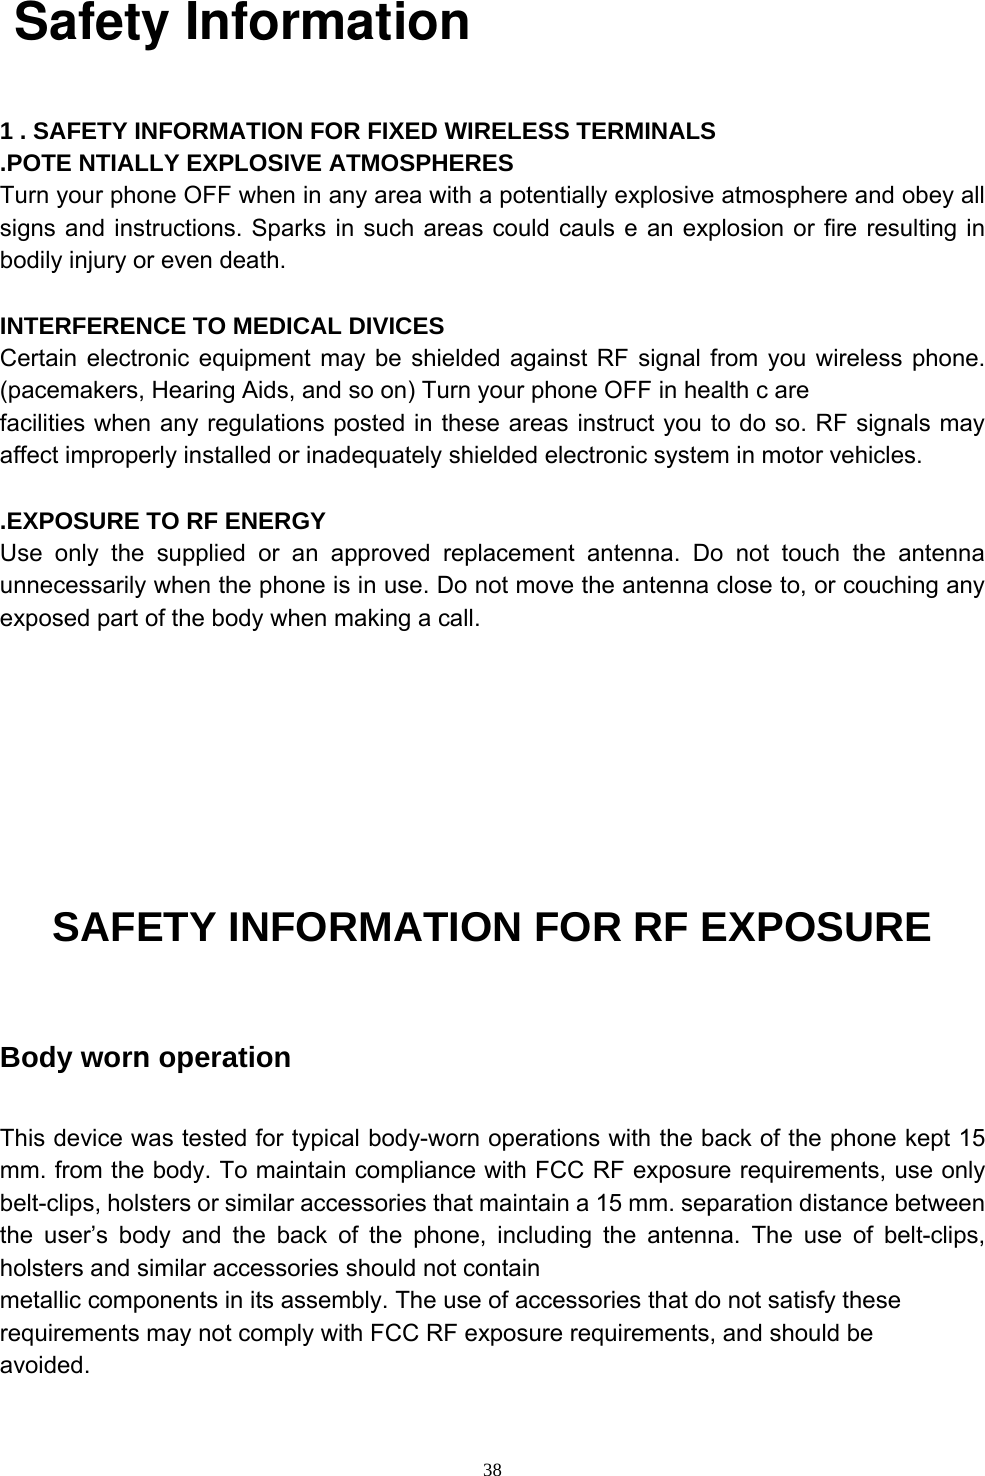                                                                        38   Safety Information   1 . SAFETY INFORMATION FOR FIXED WIRELESS TERMINALS .POTE NTIALLY EXPLOSIVE ATMOSPHERES Turn your phone OFF when in any area with a potentially explosive atmosphere and obey all signs and instructions. Sparks in such areas could cauls e an explosion or fire resulting in bodily injury or even death.  INTERFERENCE TO MEDICAL DIVICES Certain electronic equipment may be shielded against RF signal from you wireless phone. (pacemakers, Hearing Aids, and so on) Turn your phone OFF in health c are facilities when any regulations posted in these areas instruct you to do so. RF signals may affect improperly installed or inadequately shielded electronic system in motor vehicles.  .EXPOSURE TO RF ENERGY Use only the supplied or an approved replacement antenna. Do not touch the antenna unnecessarily when the phone is in use. Do not move the antenna close to, or couching any exposed part of the body when making a call.     SAFETY INFORMATION FOR RF EXPOSURE  Body worn operation  This device was tested for typical body-worn operations with the back of the phone kept 15 mm. from the body. To maintain compliance with FCC RF exposure requirements, use only belt-clips, holsters or similar accessories that maintain a 15 mm. separation distance between the user’s body and the back of the phone, including the antenna. The use of belt-clips, holsters and similar accessories should not contain metallic components in its assembly. The use of accessories that do not satisfy these requirements may not comply with FCC RF exposure requirements, and should be avoided. 